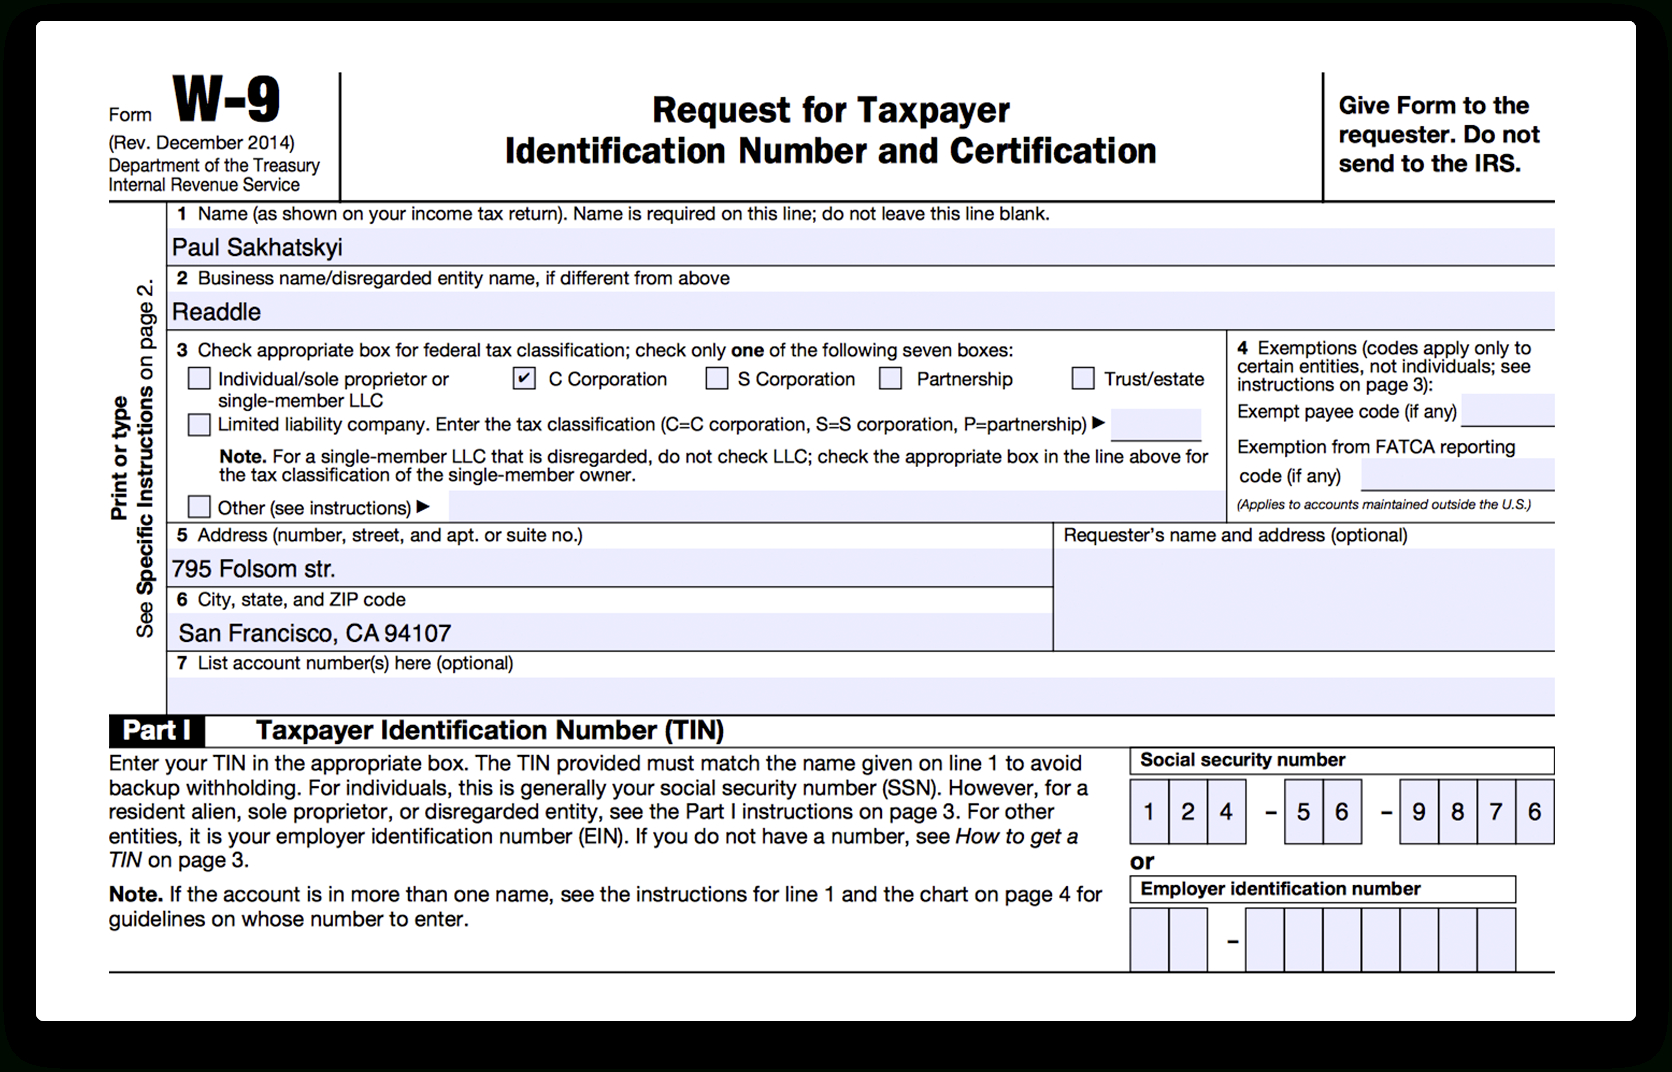 How To Fill Out Irs Form W-9 2017-2018 | Pdf Expert